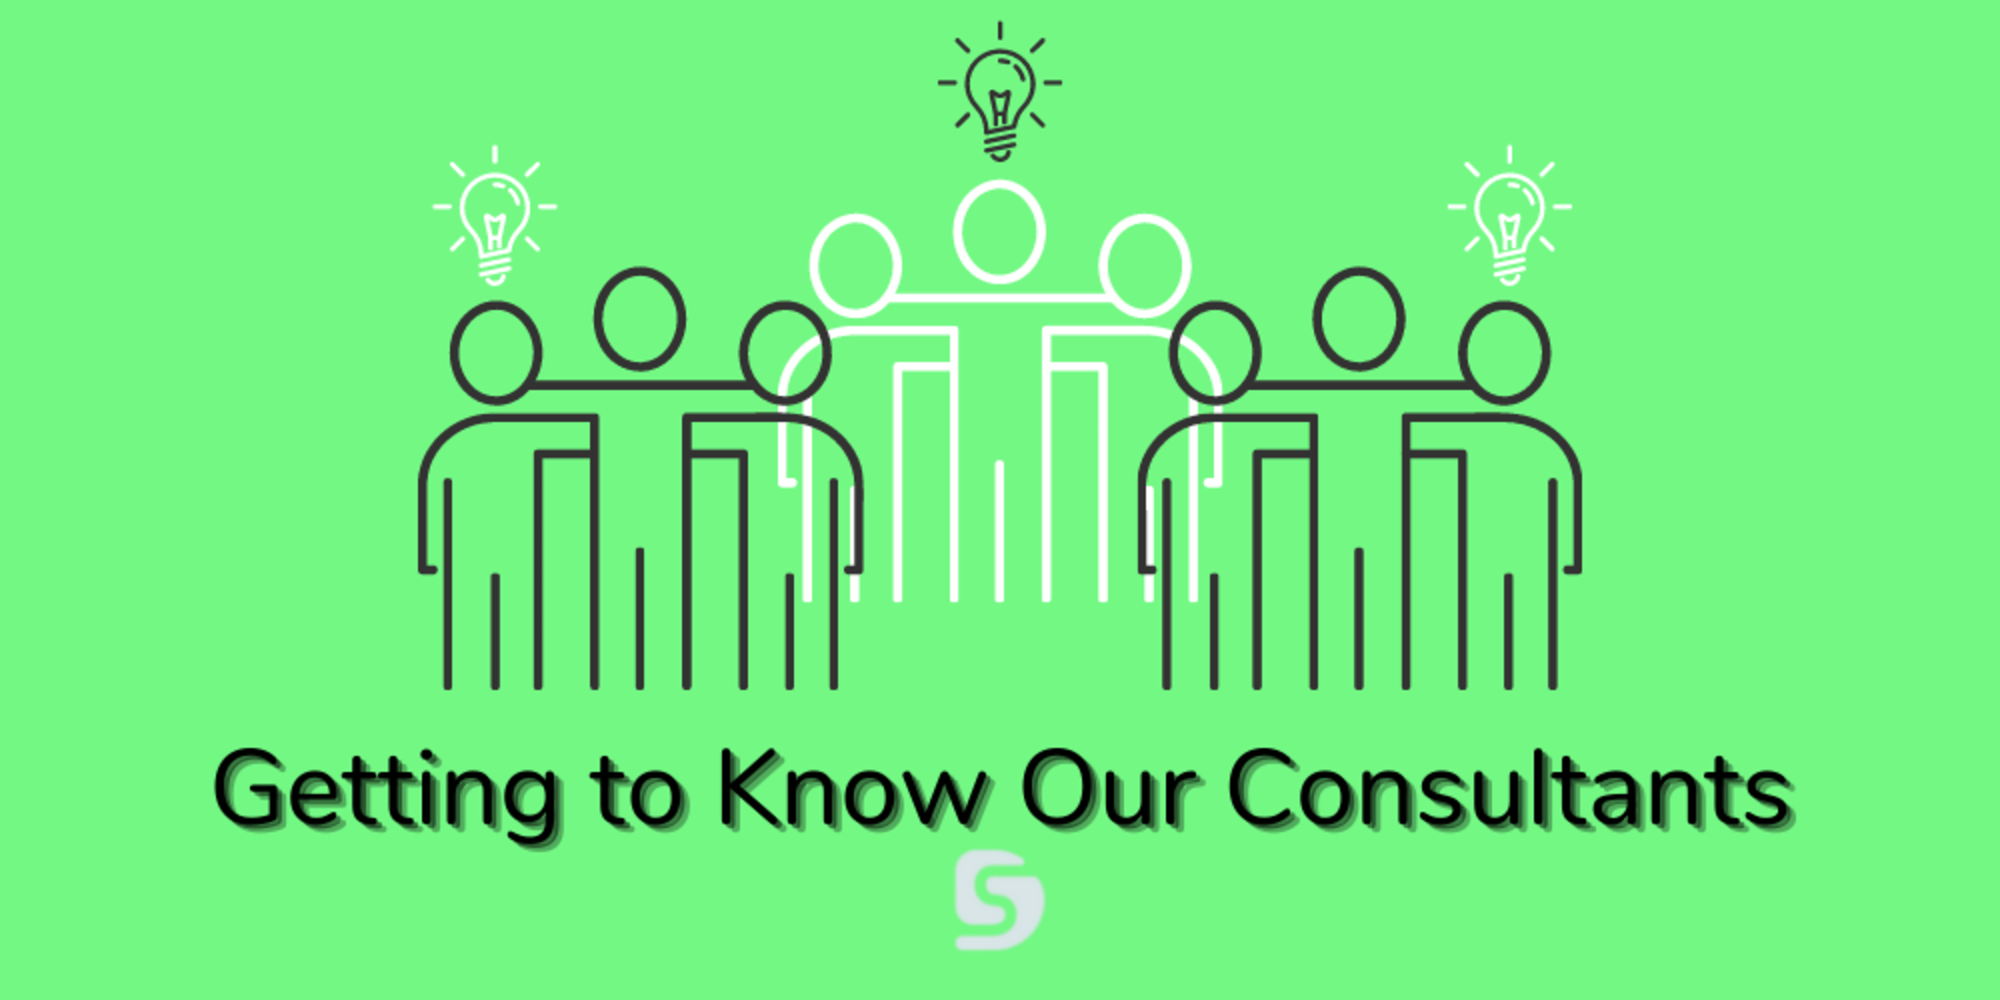 Getting To Know Our Consultants   10 Questions Over 10 Weeks (9)